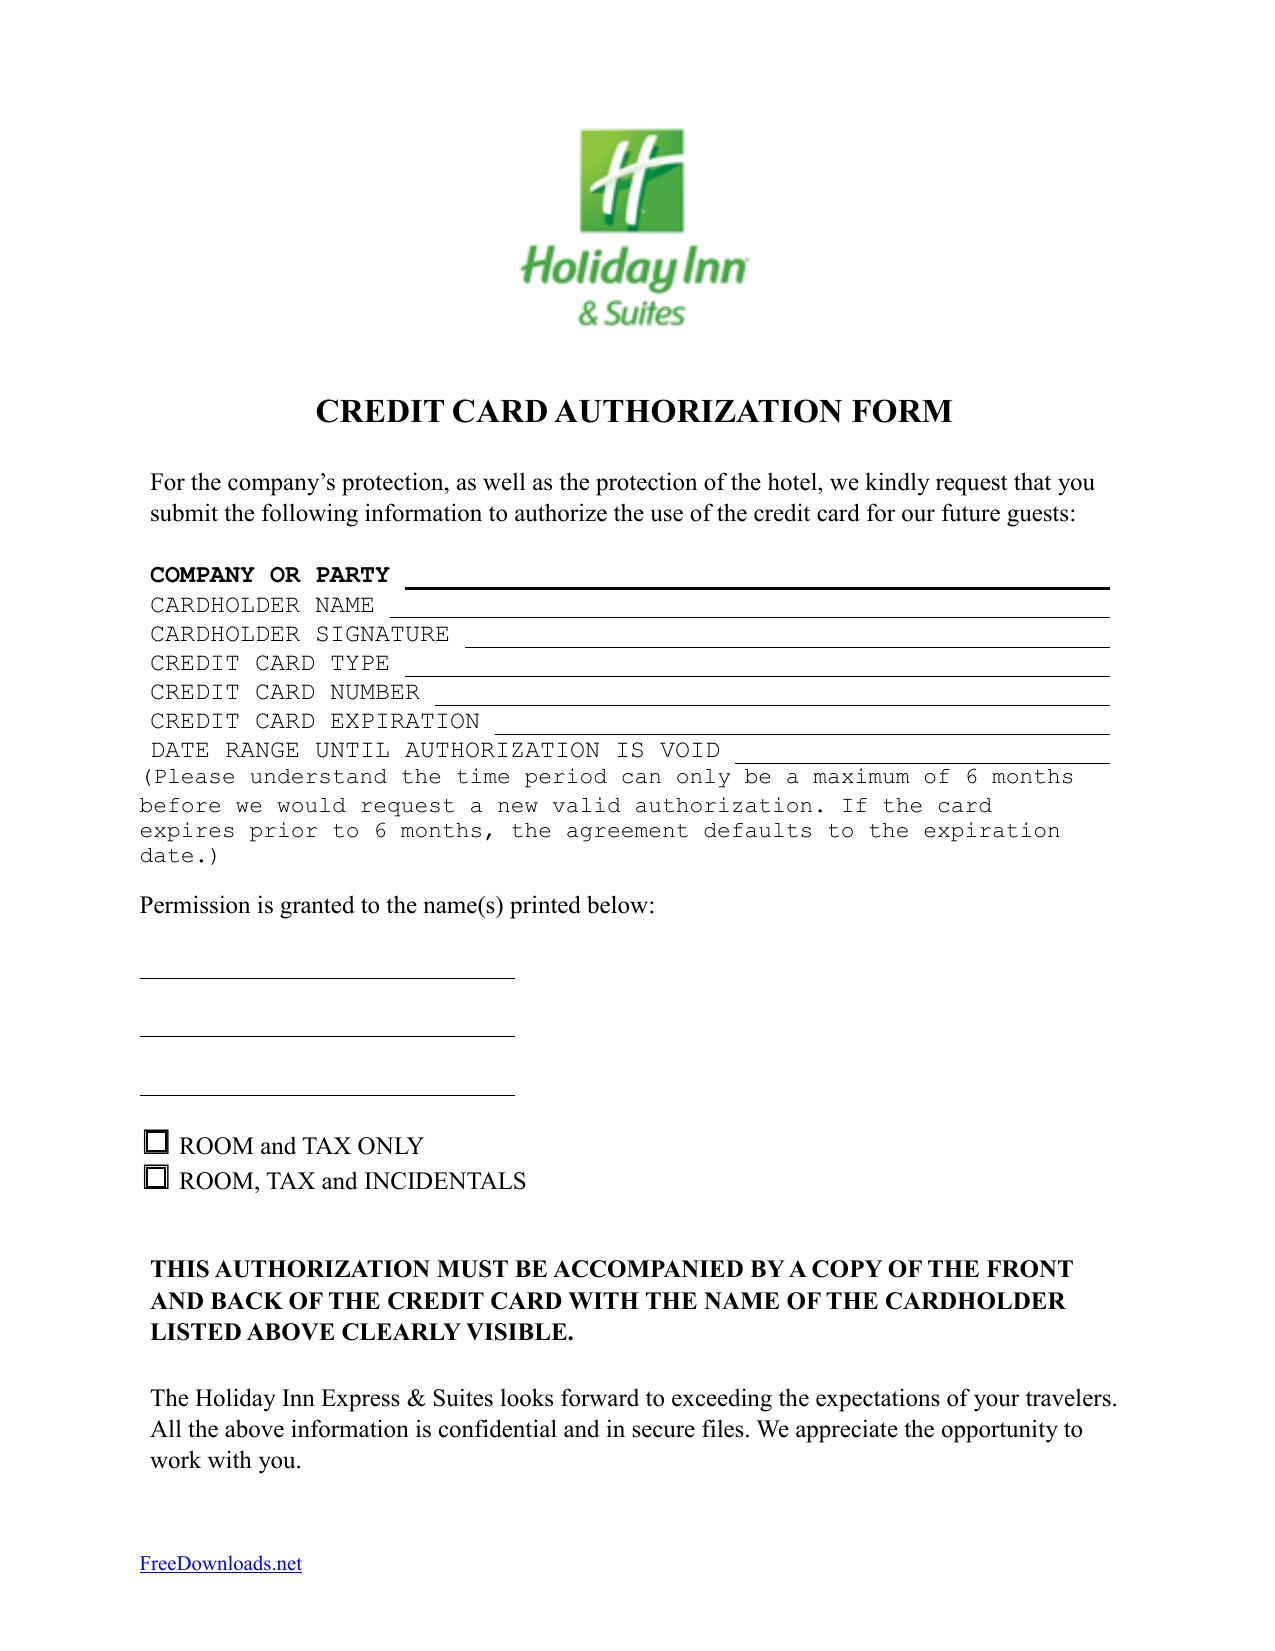 Download Holiday Inn Credit Card Authorization Form Template With Regard To Hotel Credit Card Authorization Form Template